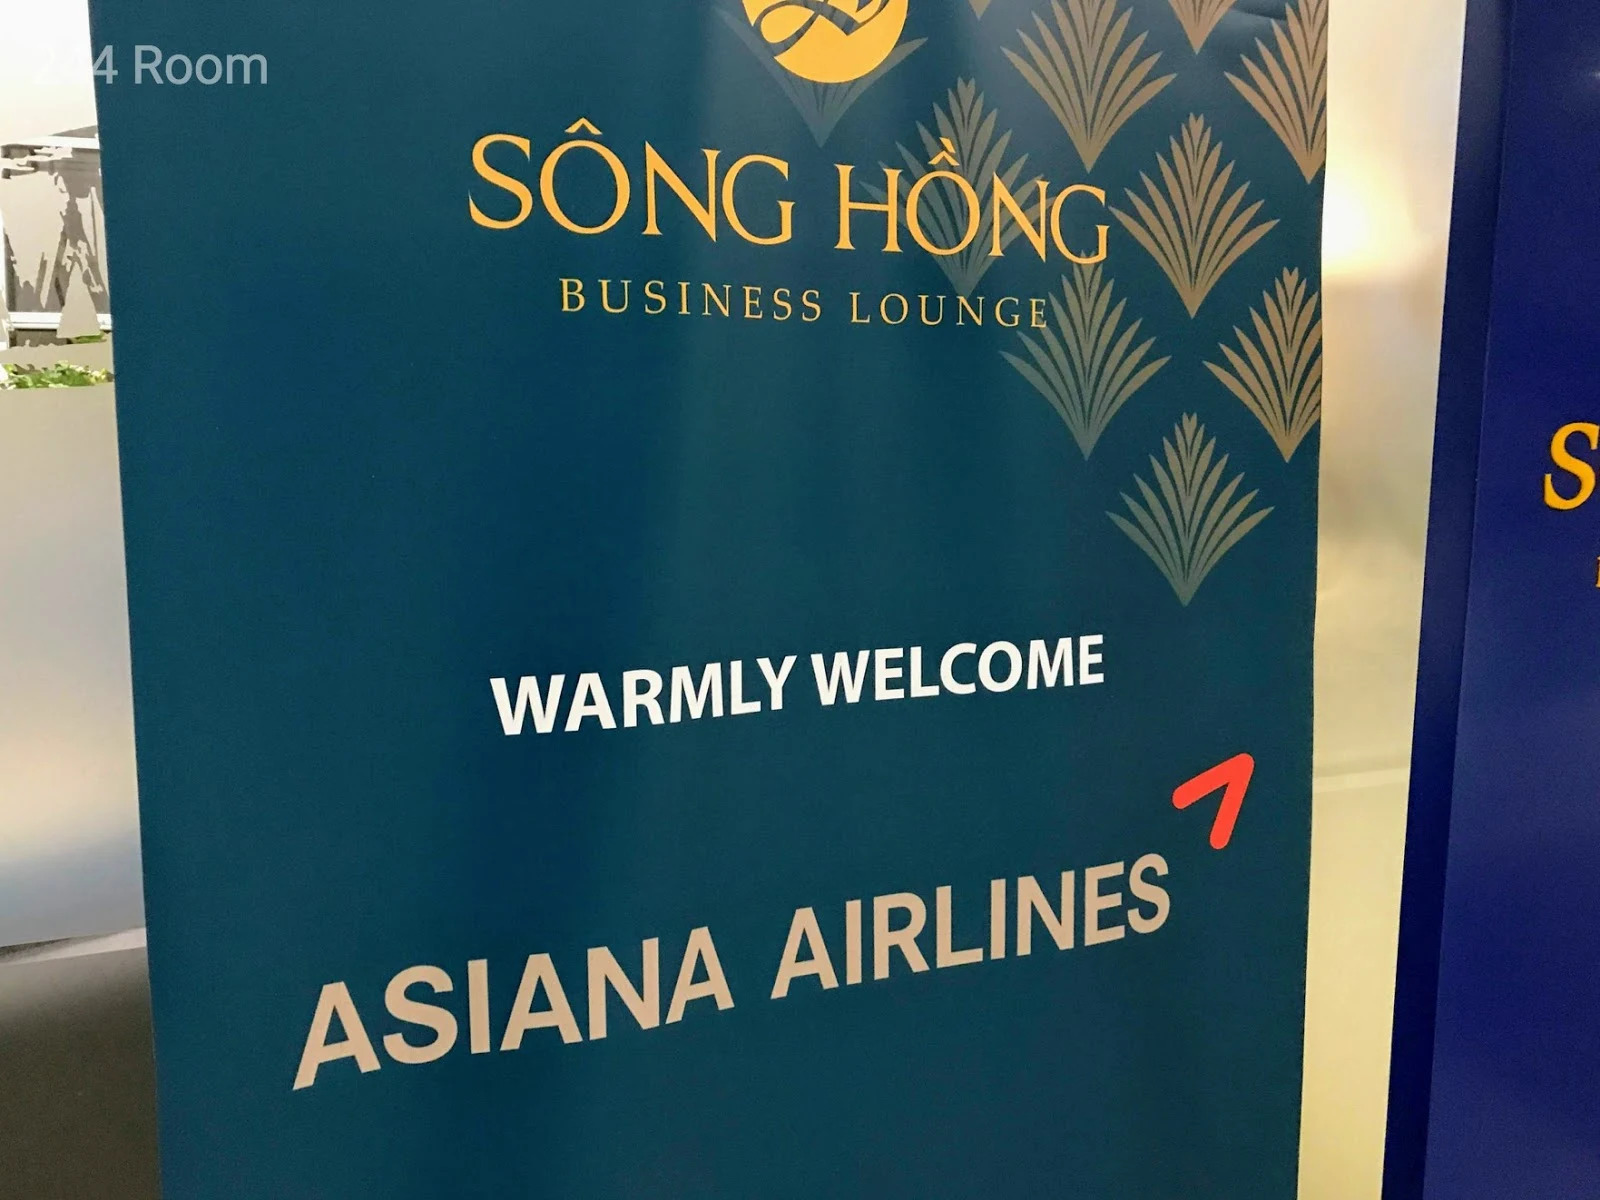 Song hong business lounge entrance3